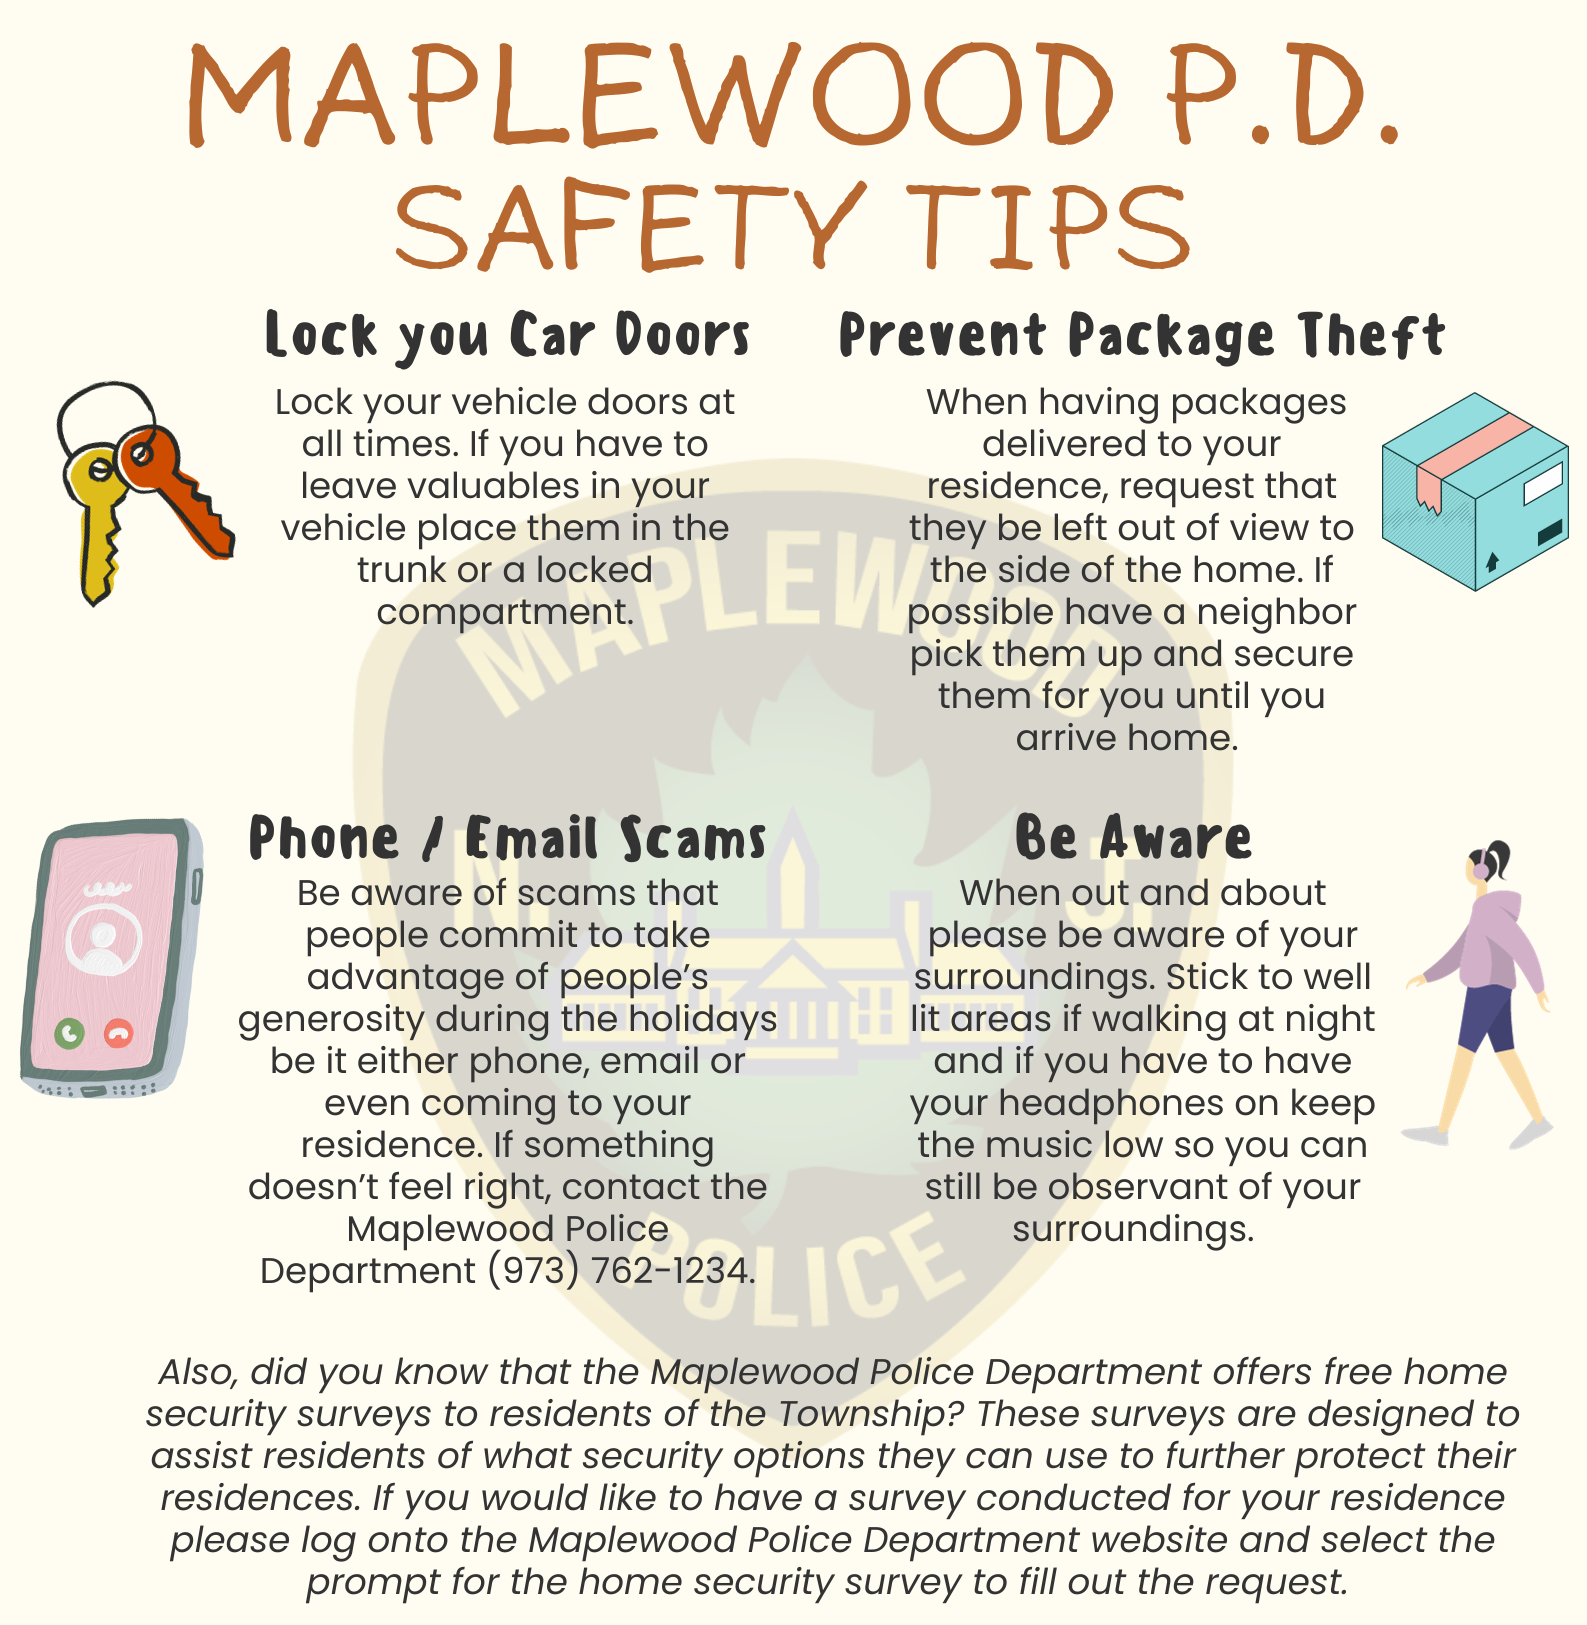 MPD SAFETY TIPs